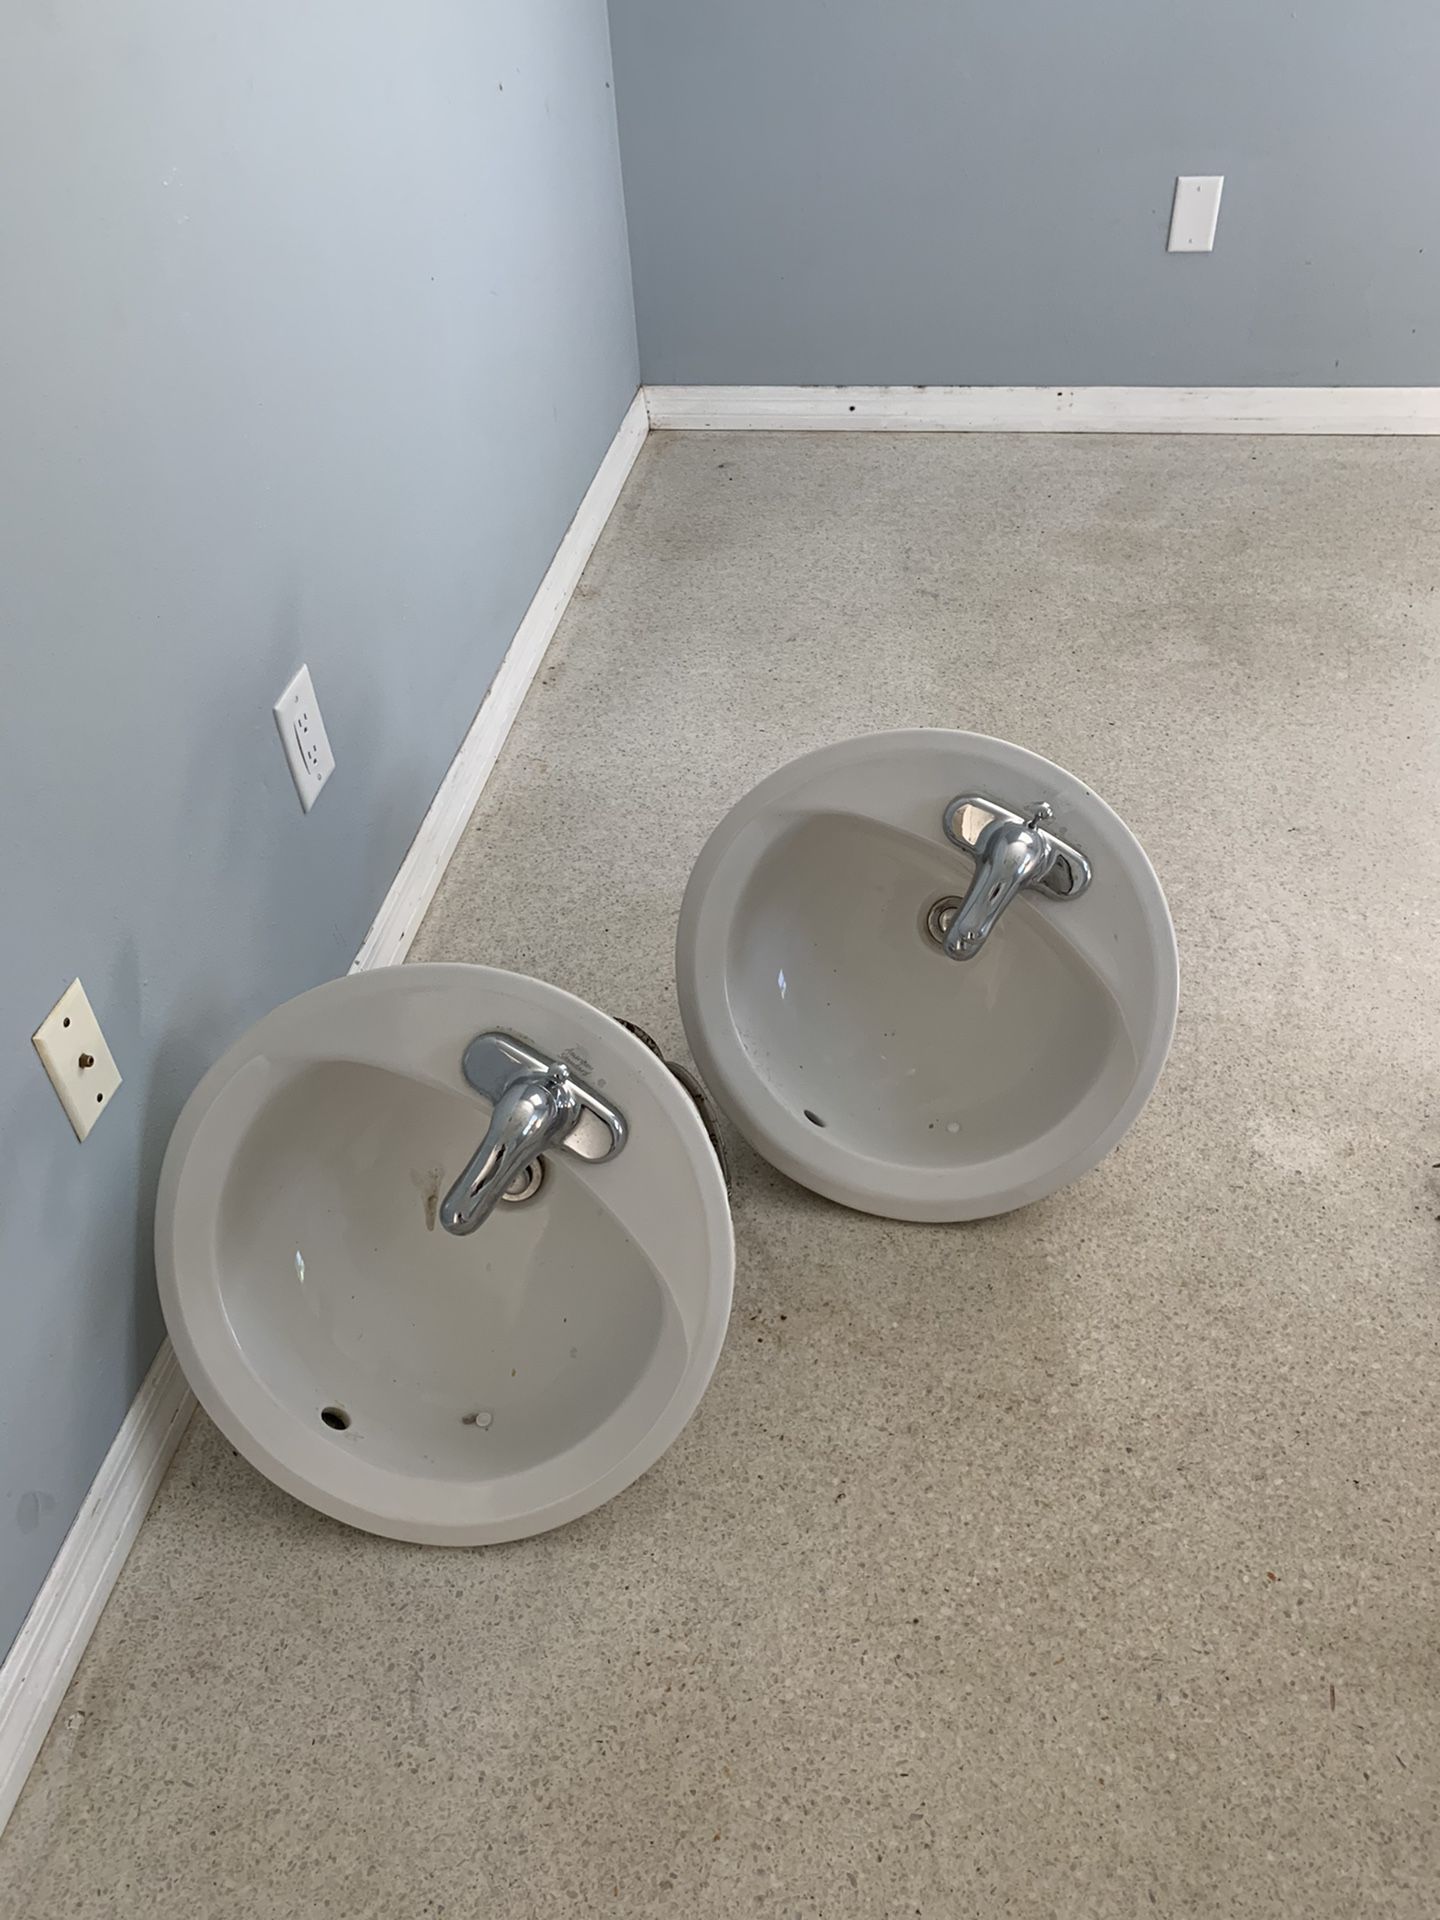 Two vanity sinks with faucets